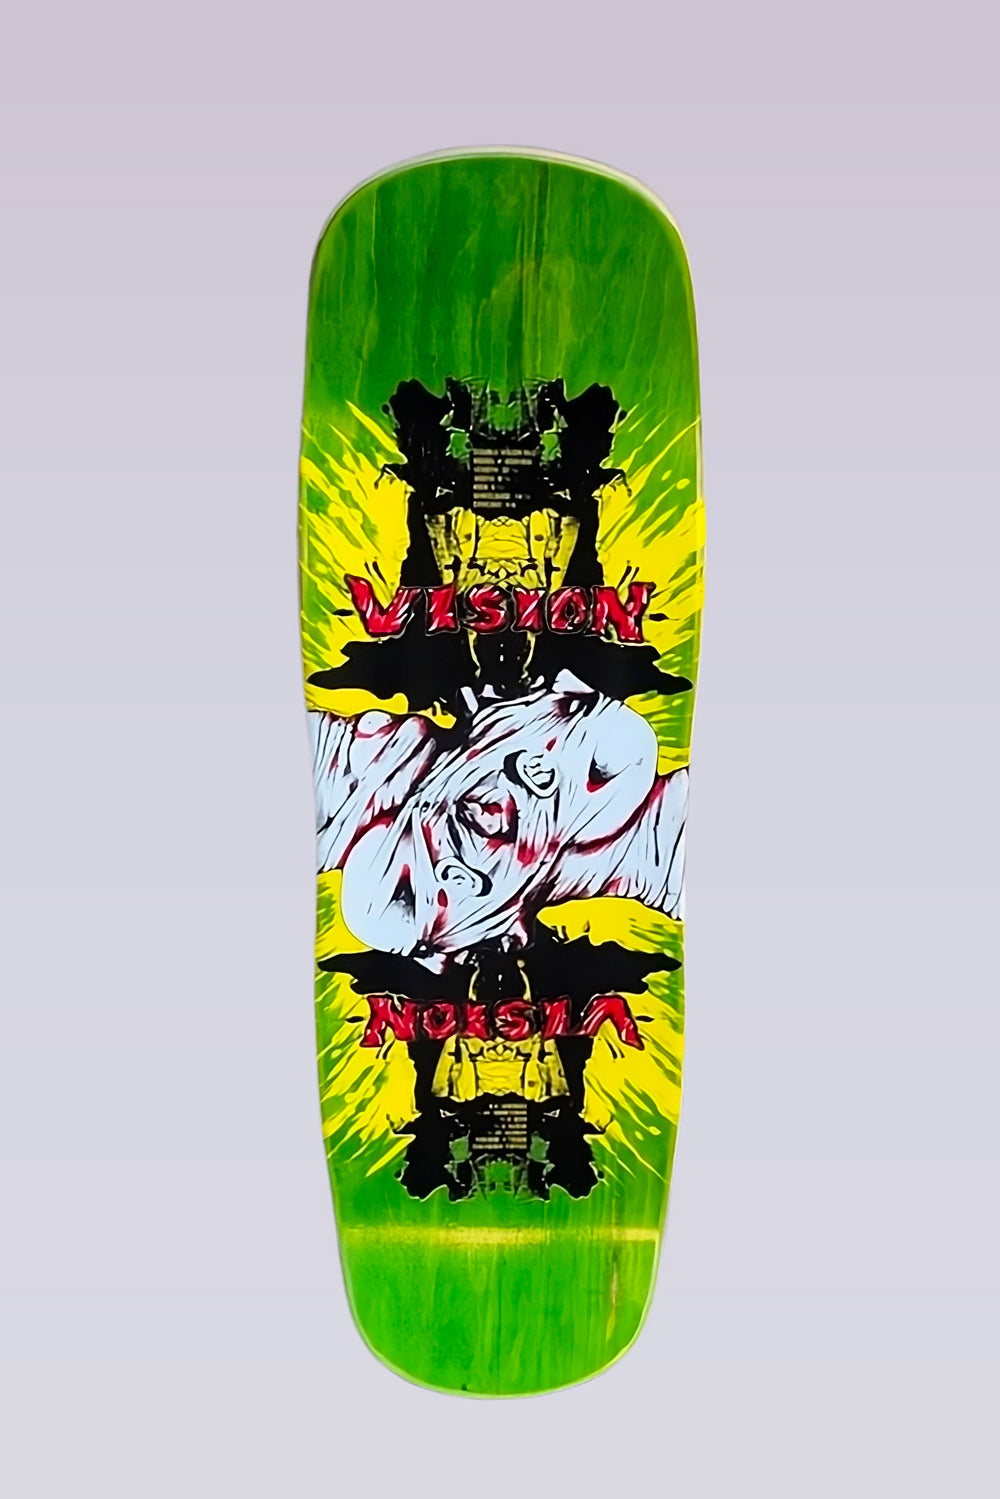 Double Vision Deck - 9.5"x32.5" - Lime Stain